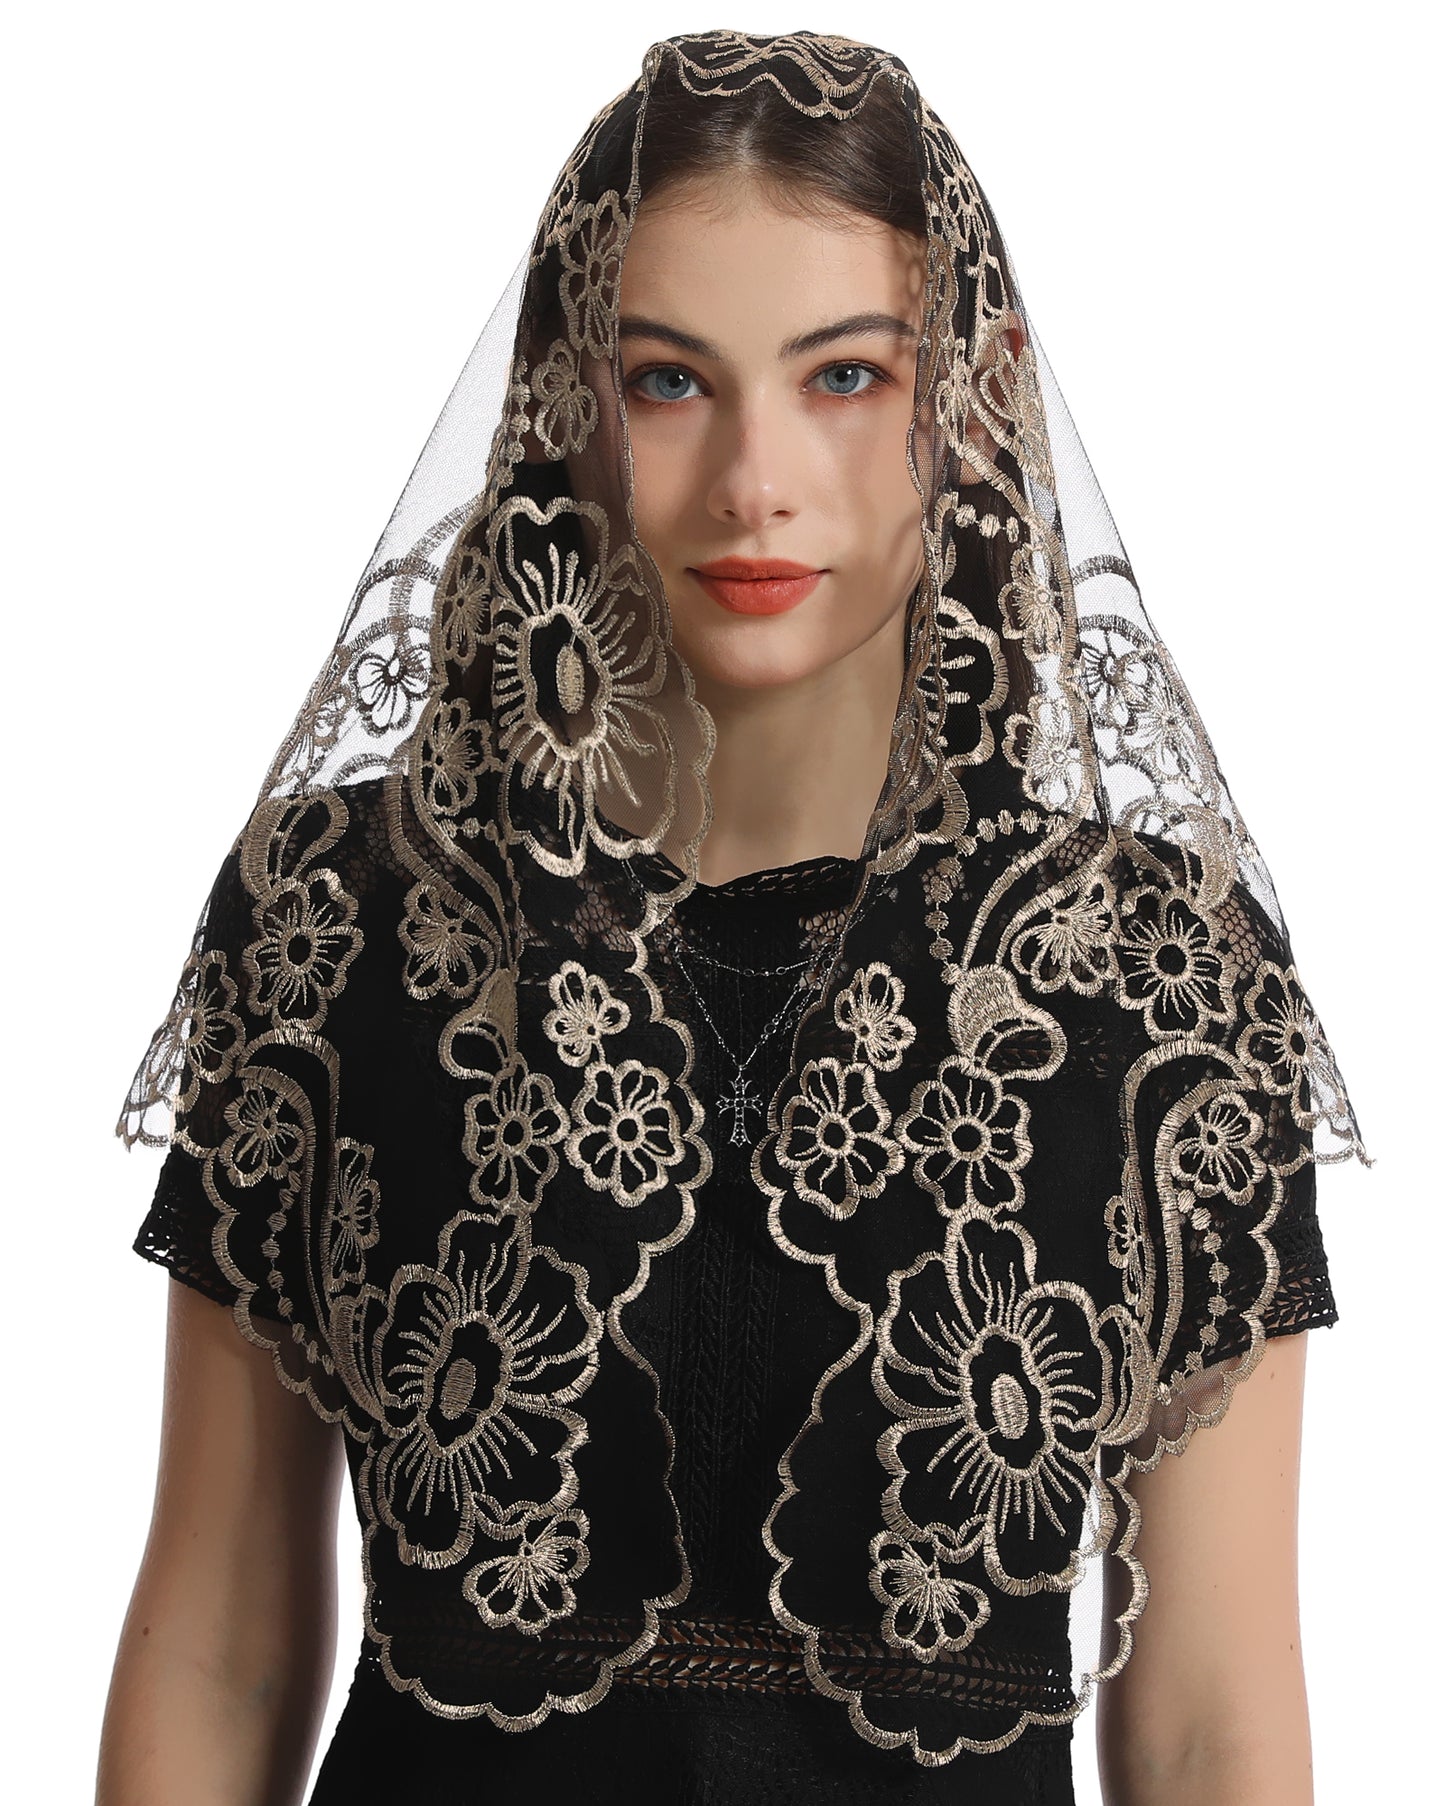 Bozidol Triangle Church Head Covering - Madonna Camellia Embroidered Veil Chapel Veil for women